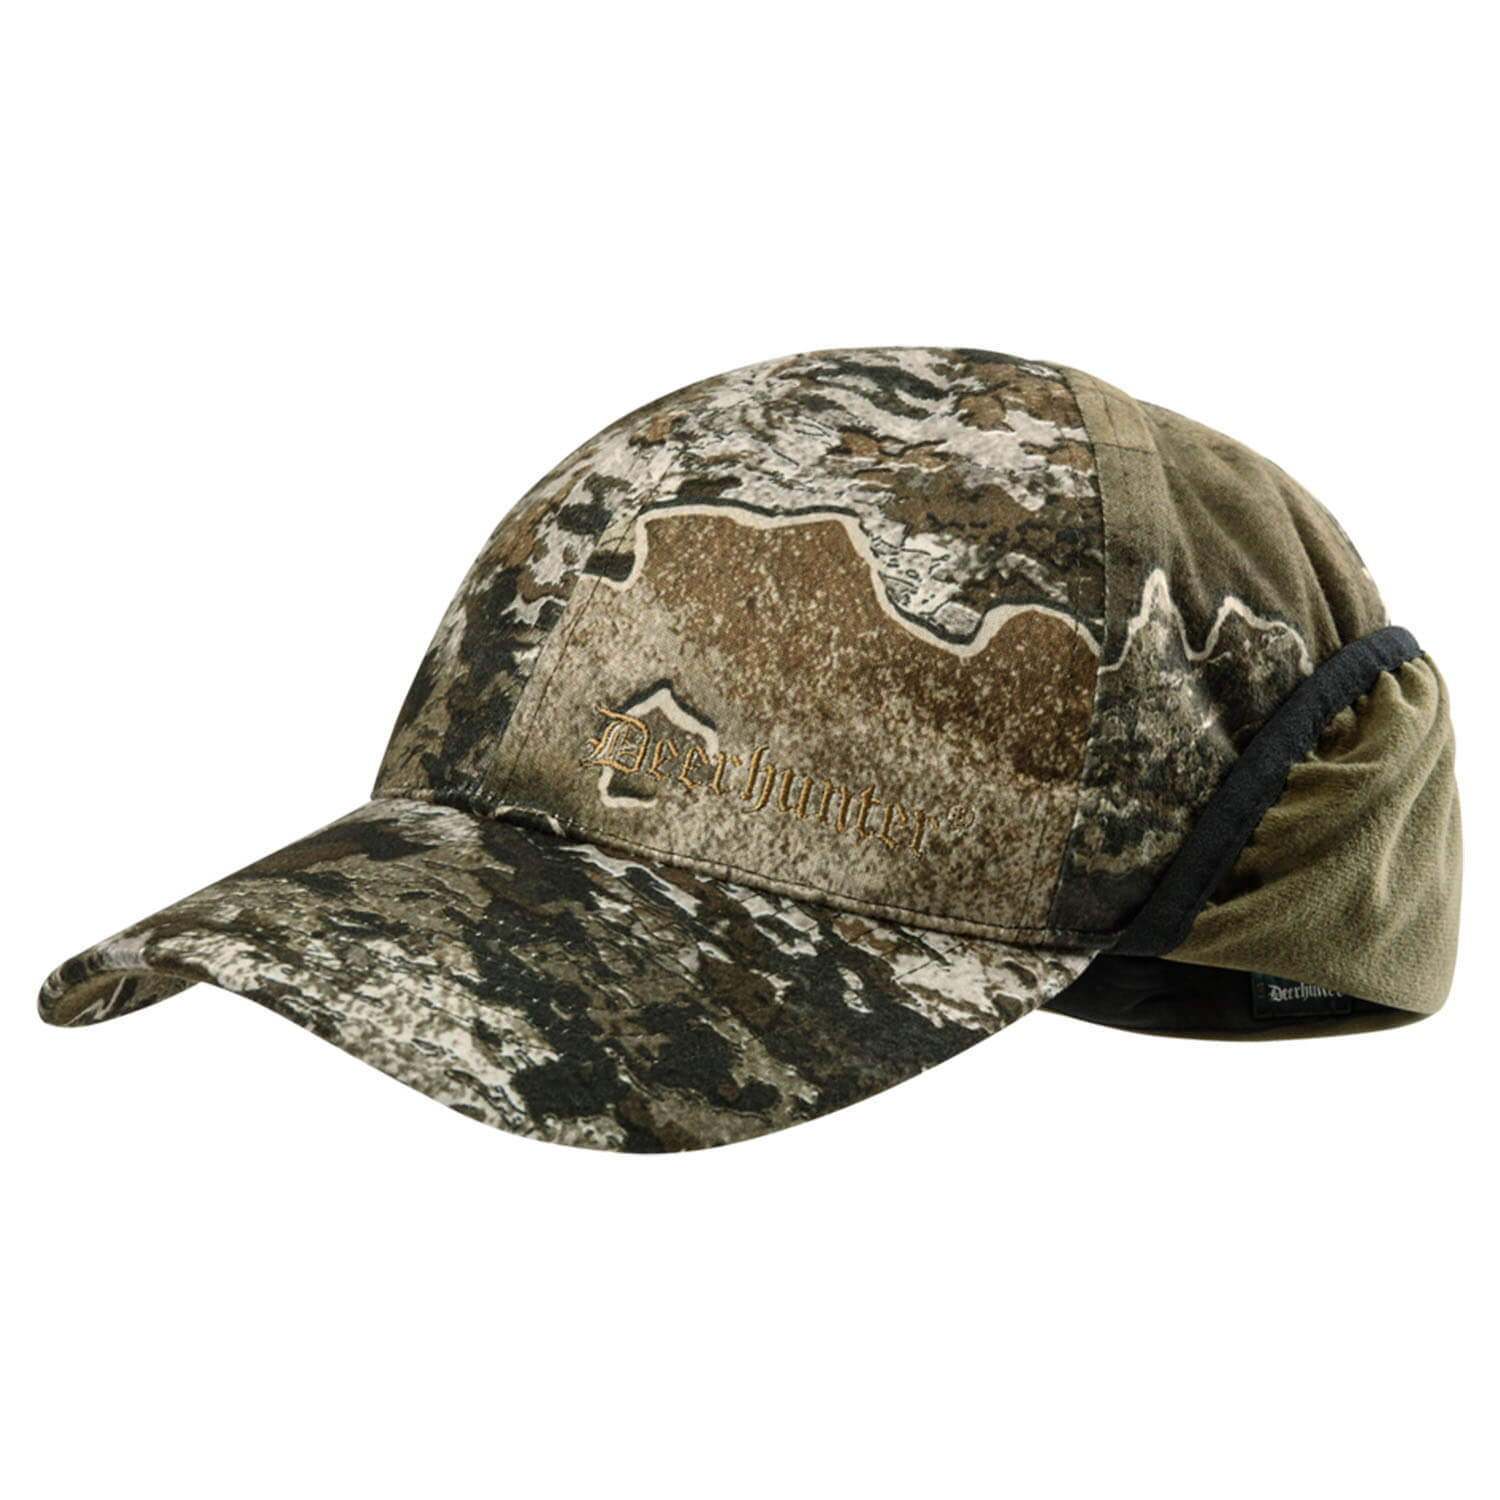 Deerhunter Wintermütze Excape (realtree excape) - Winter Hunting Clothing